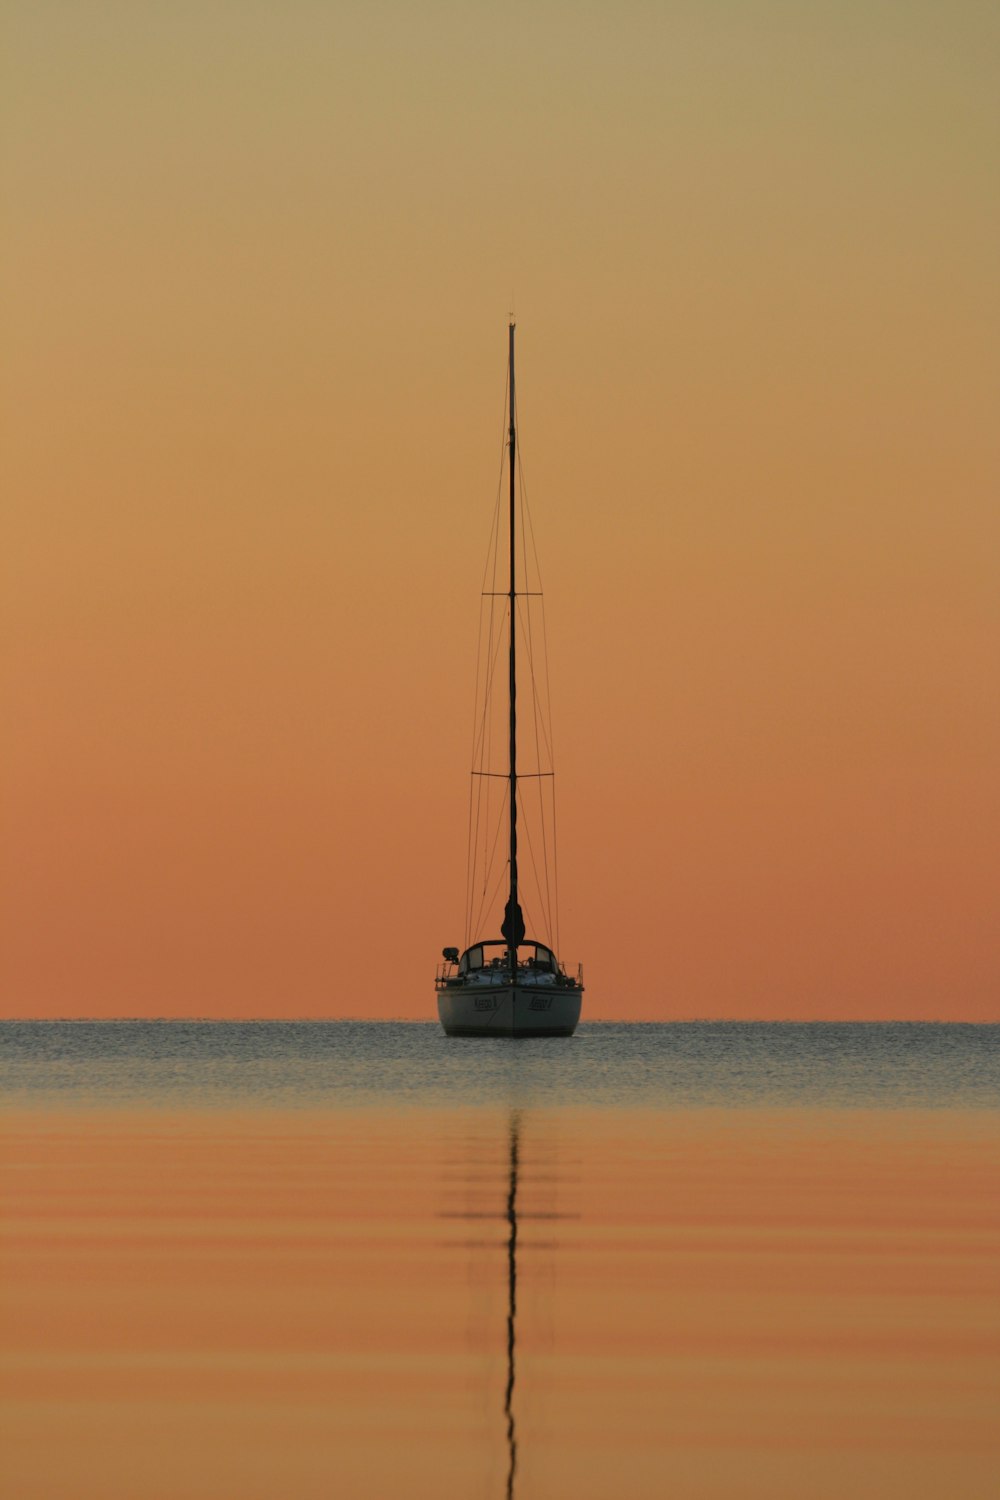 white and black boat on body of water during golden hour